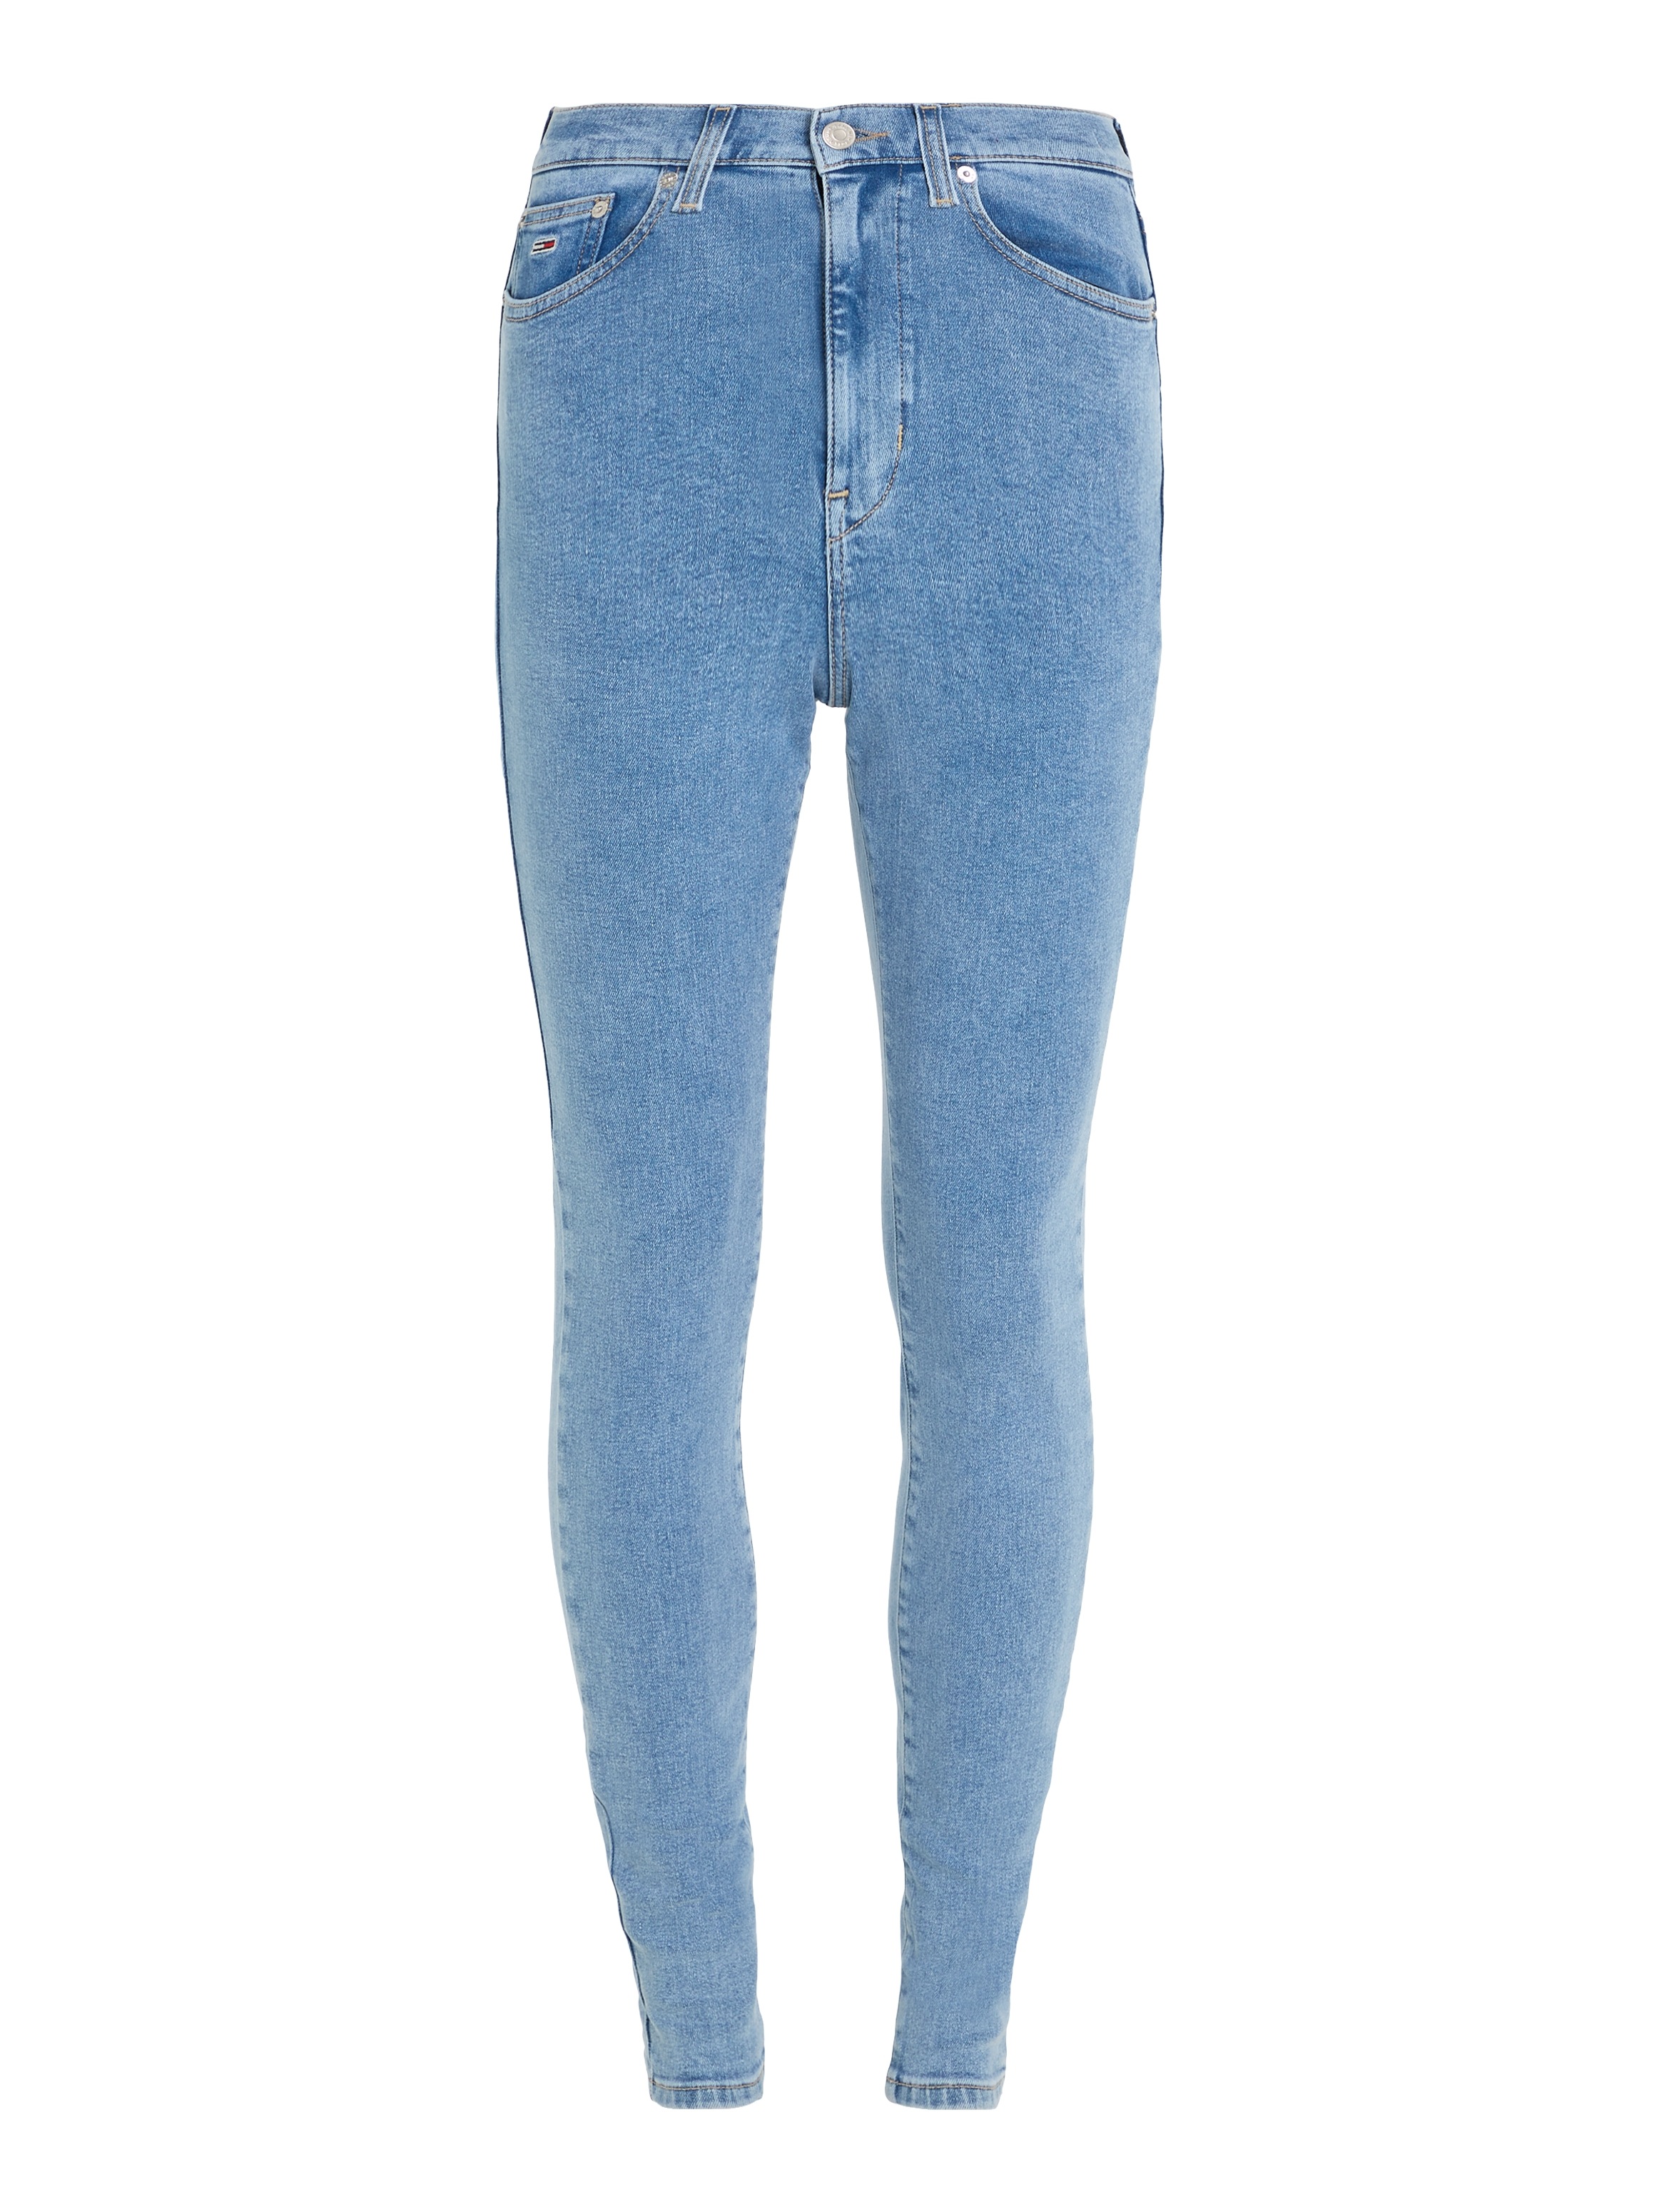 Tommy Jeans Skinny-fit-Jeans »Jeans Labelflags und SYLVIA SSKN CG4«, bei Logobadge ♕ HR mit